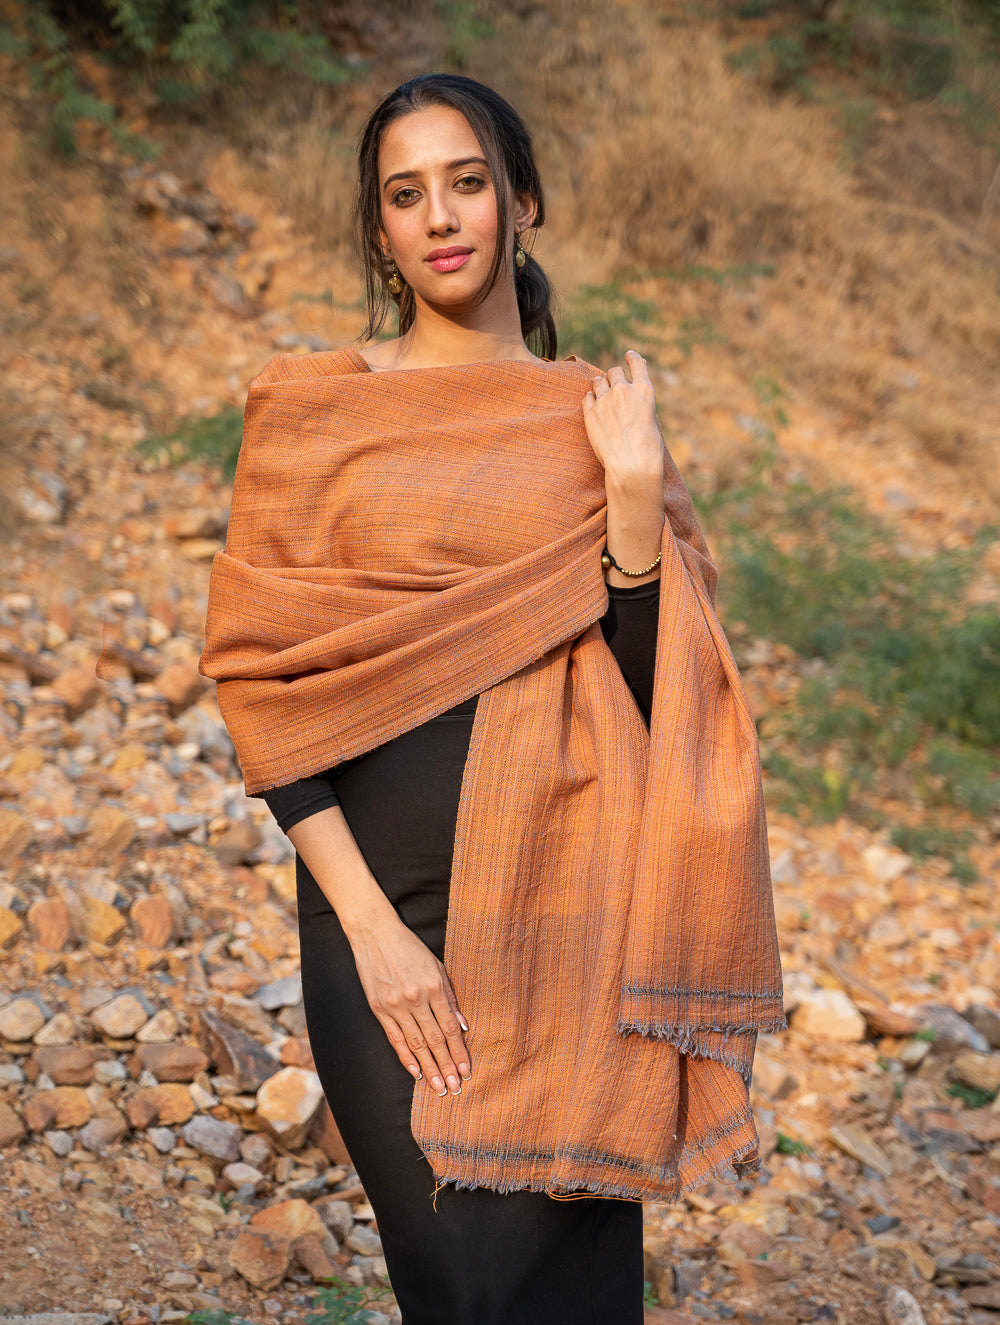 Load image into Gallery viewer, Fine, Soft Himachal Wool Plain Shawl - Pale Orange